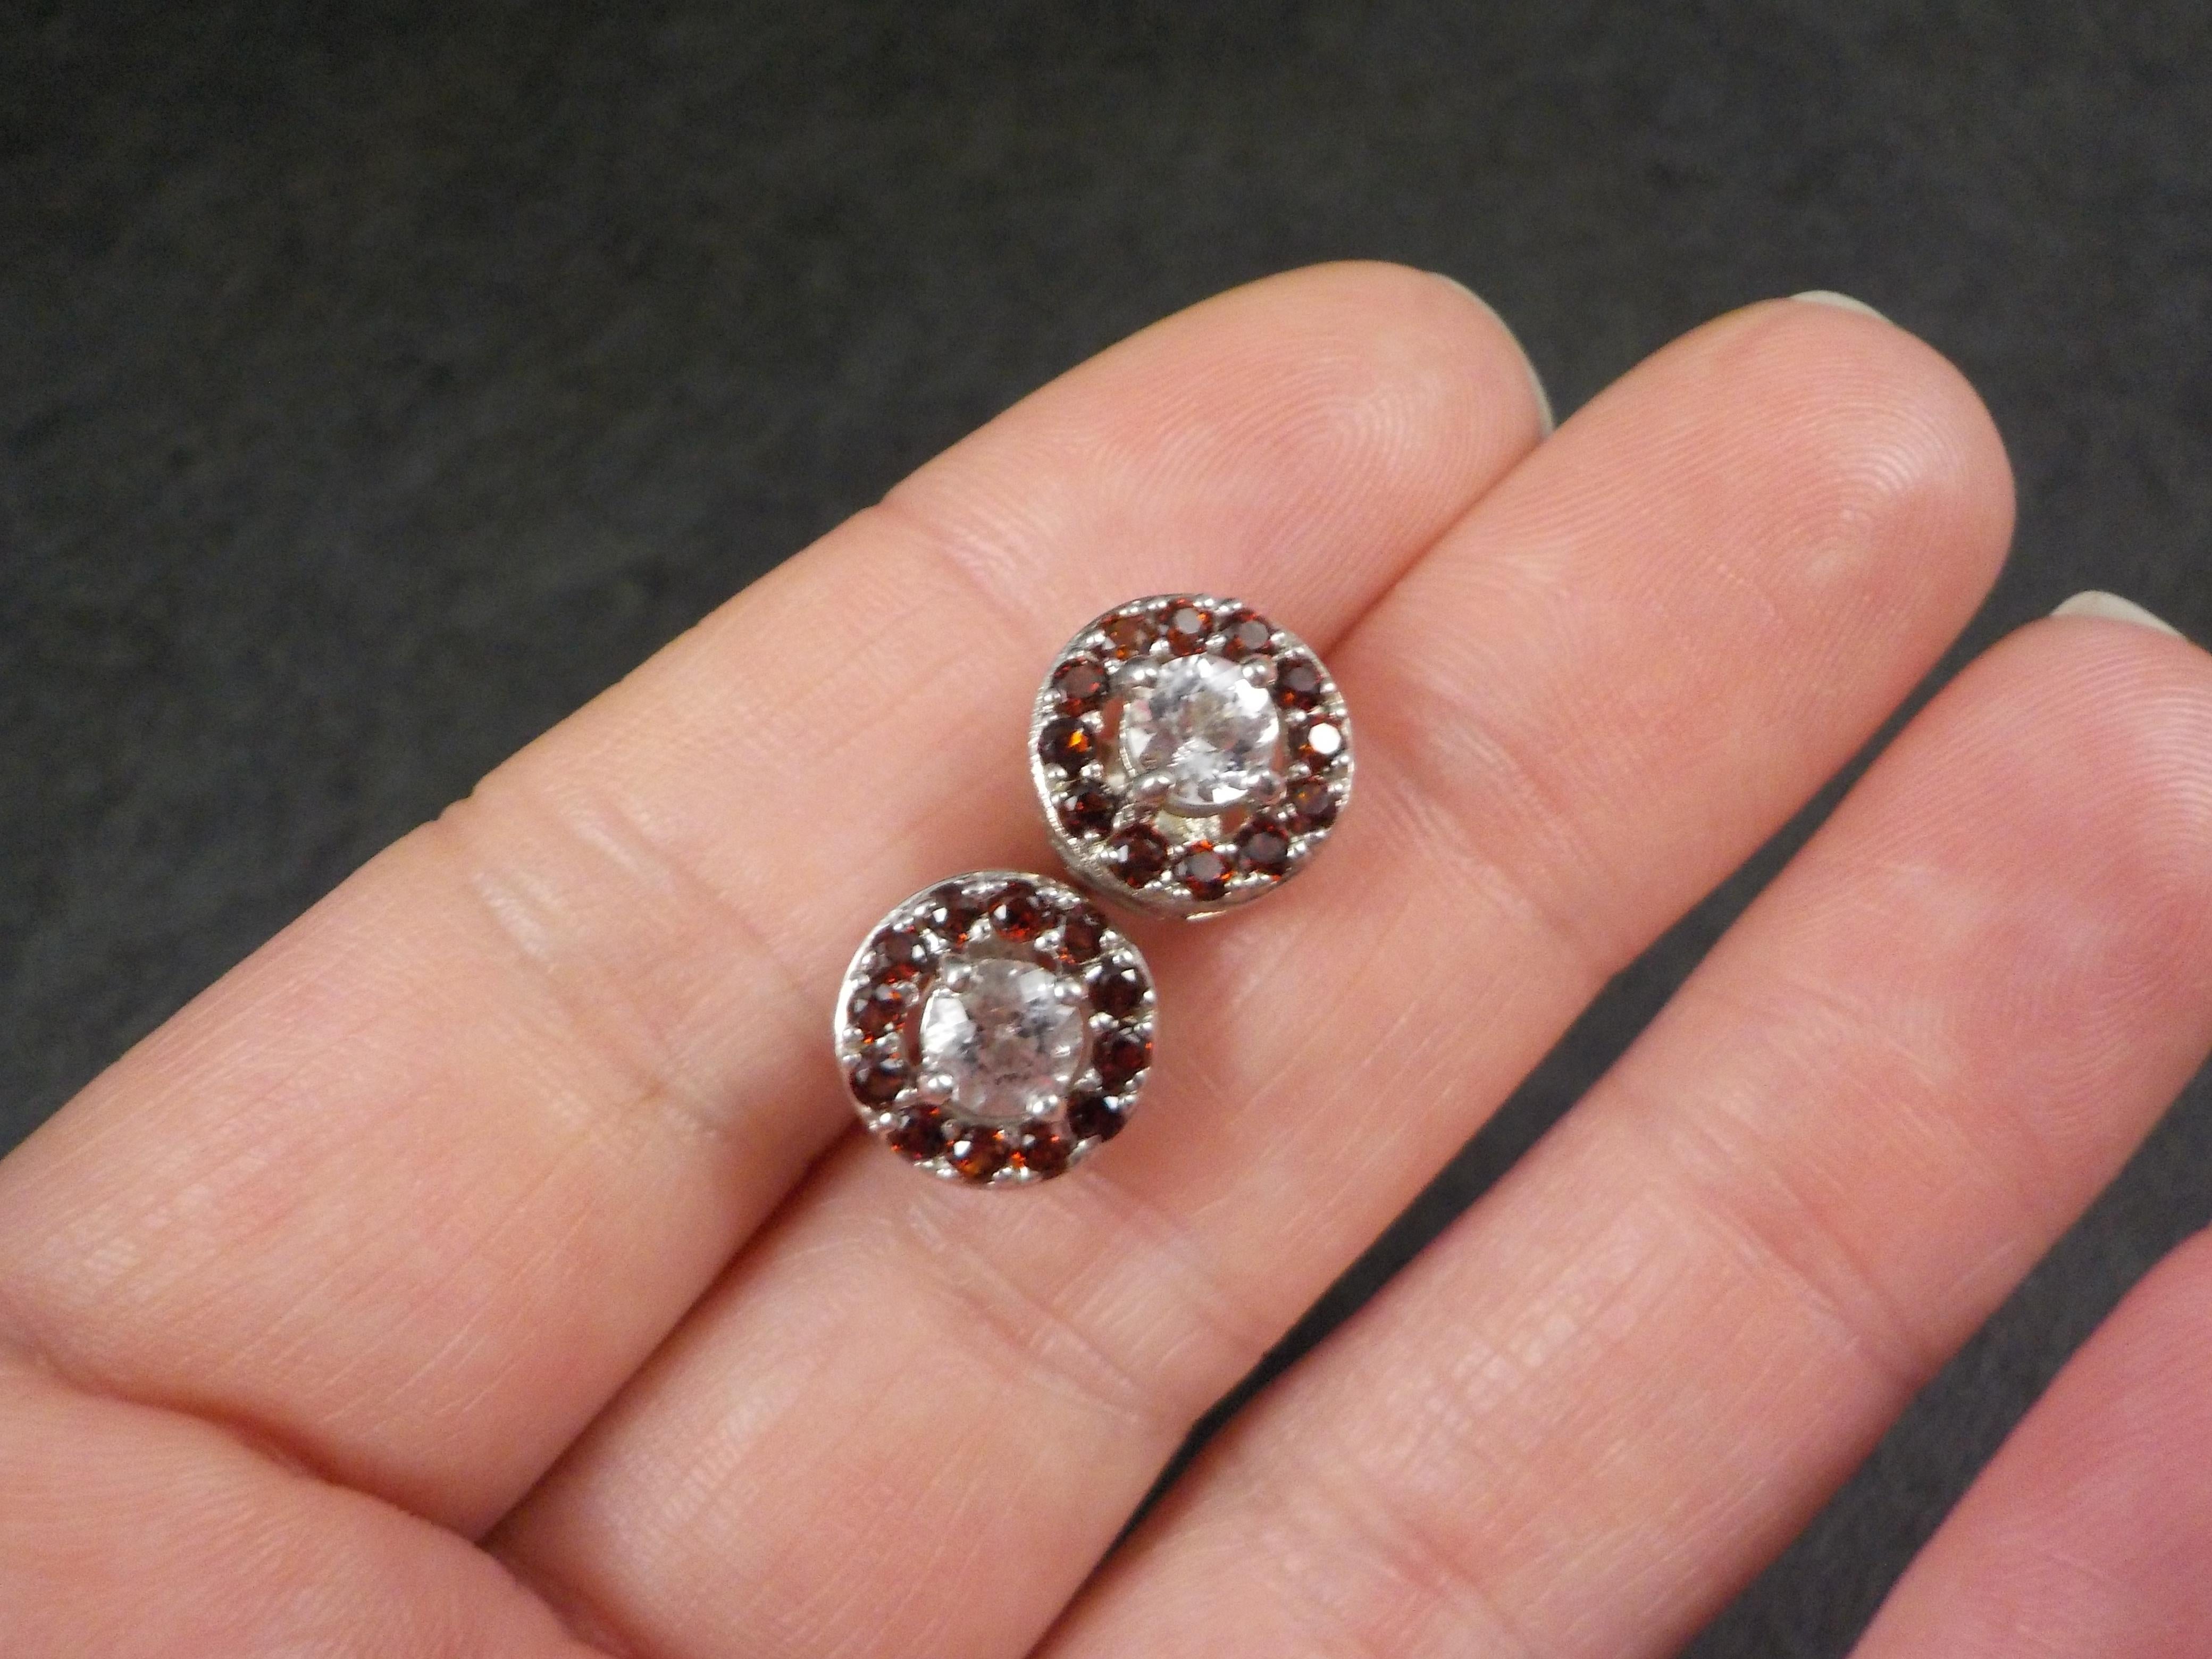 Quartz and Garnet Halo Stud Earrings Sterling Silver For Sale 1